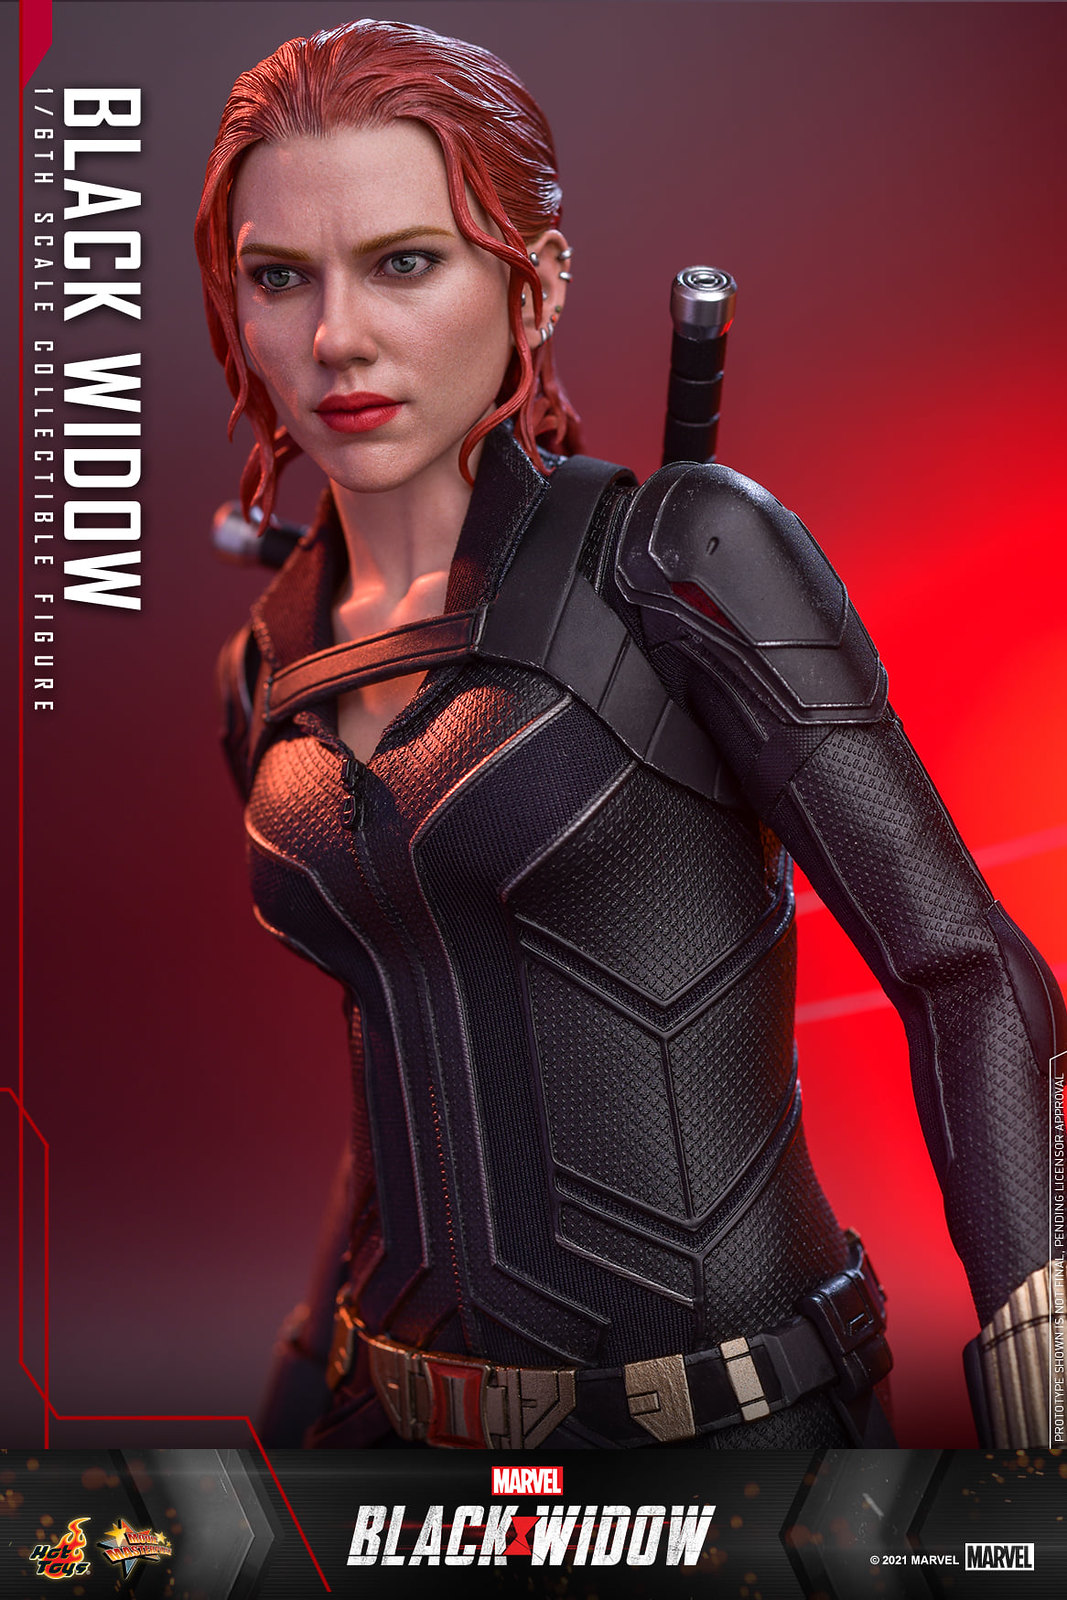 NEW PRODUCT: Hot Toys Black Widow - 1/6th scale Black Widow Collectible Figure 51312279345_2b60cd5757_h